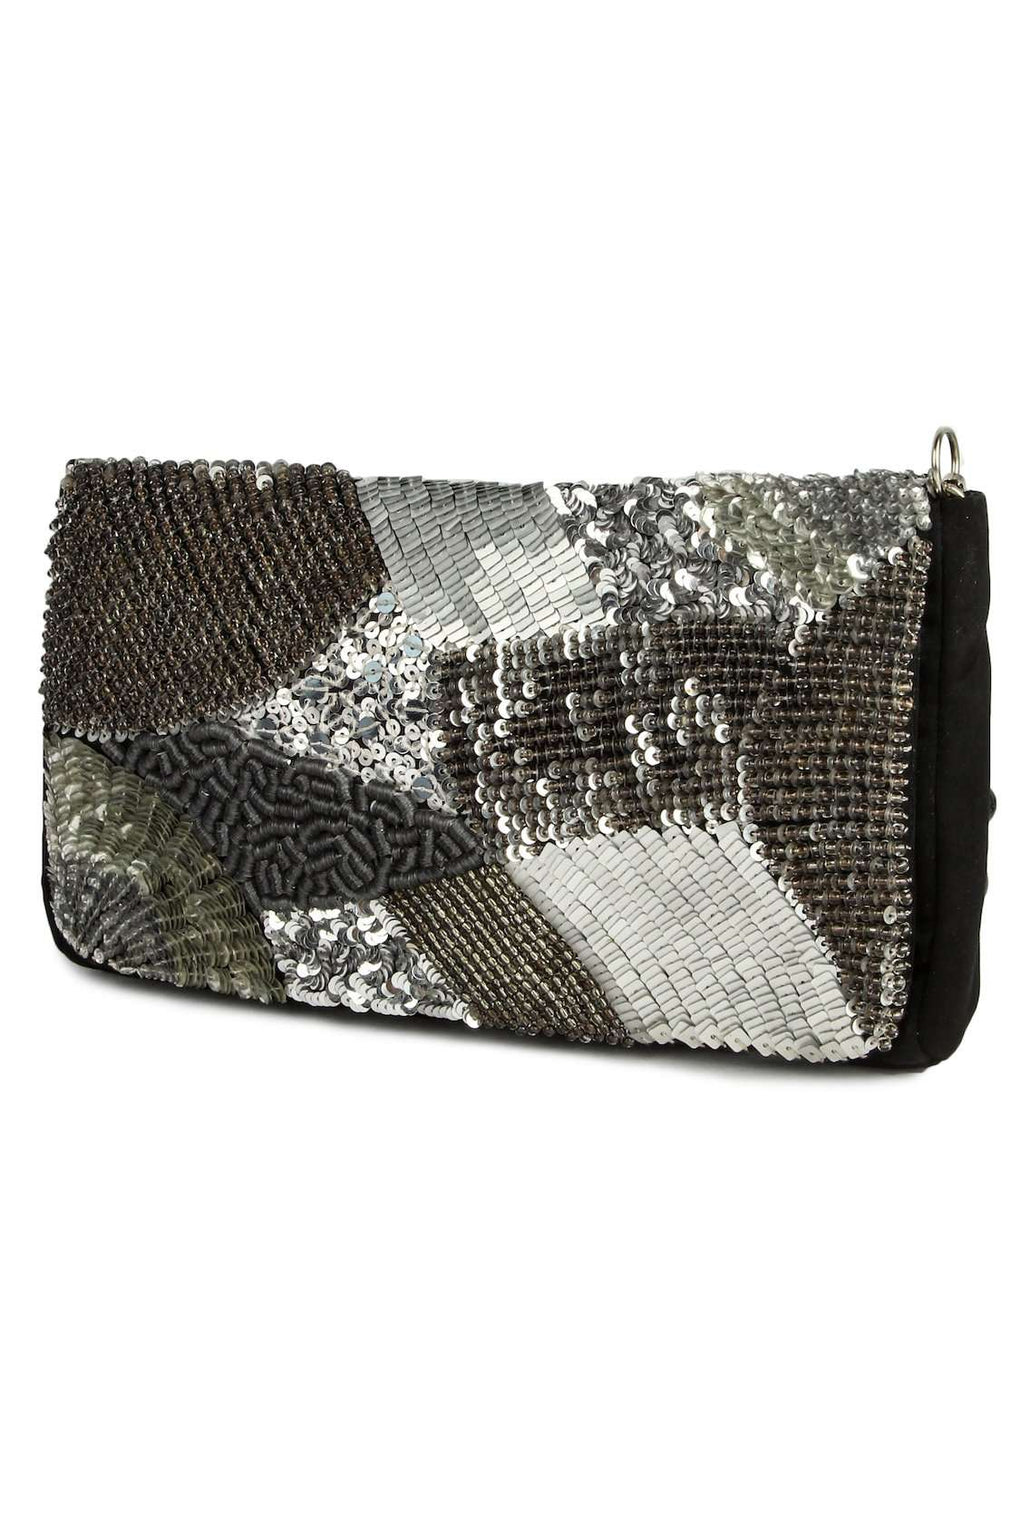 Madeline Black and Silver Clutch Bag